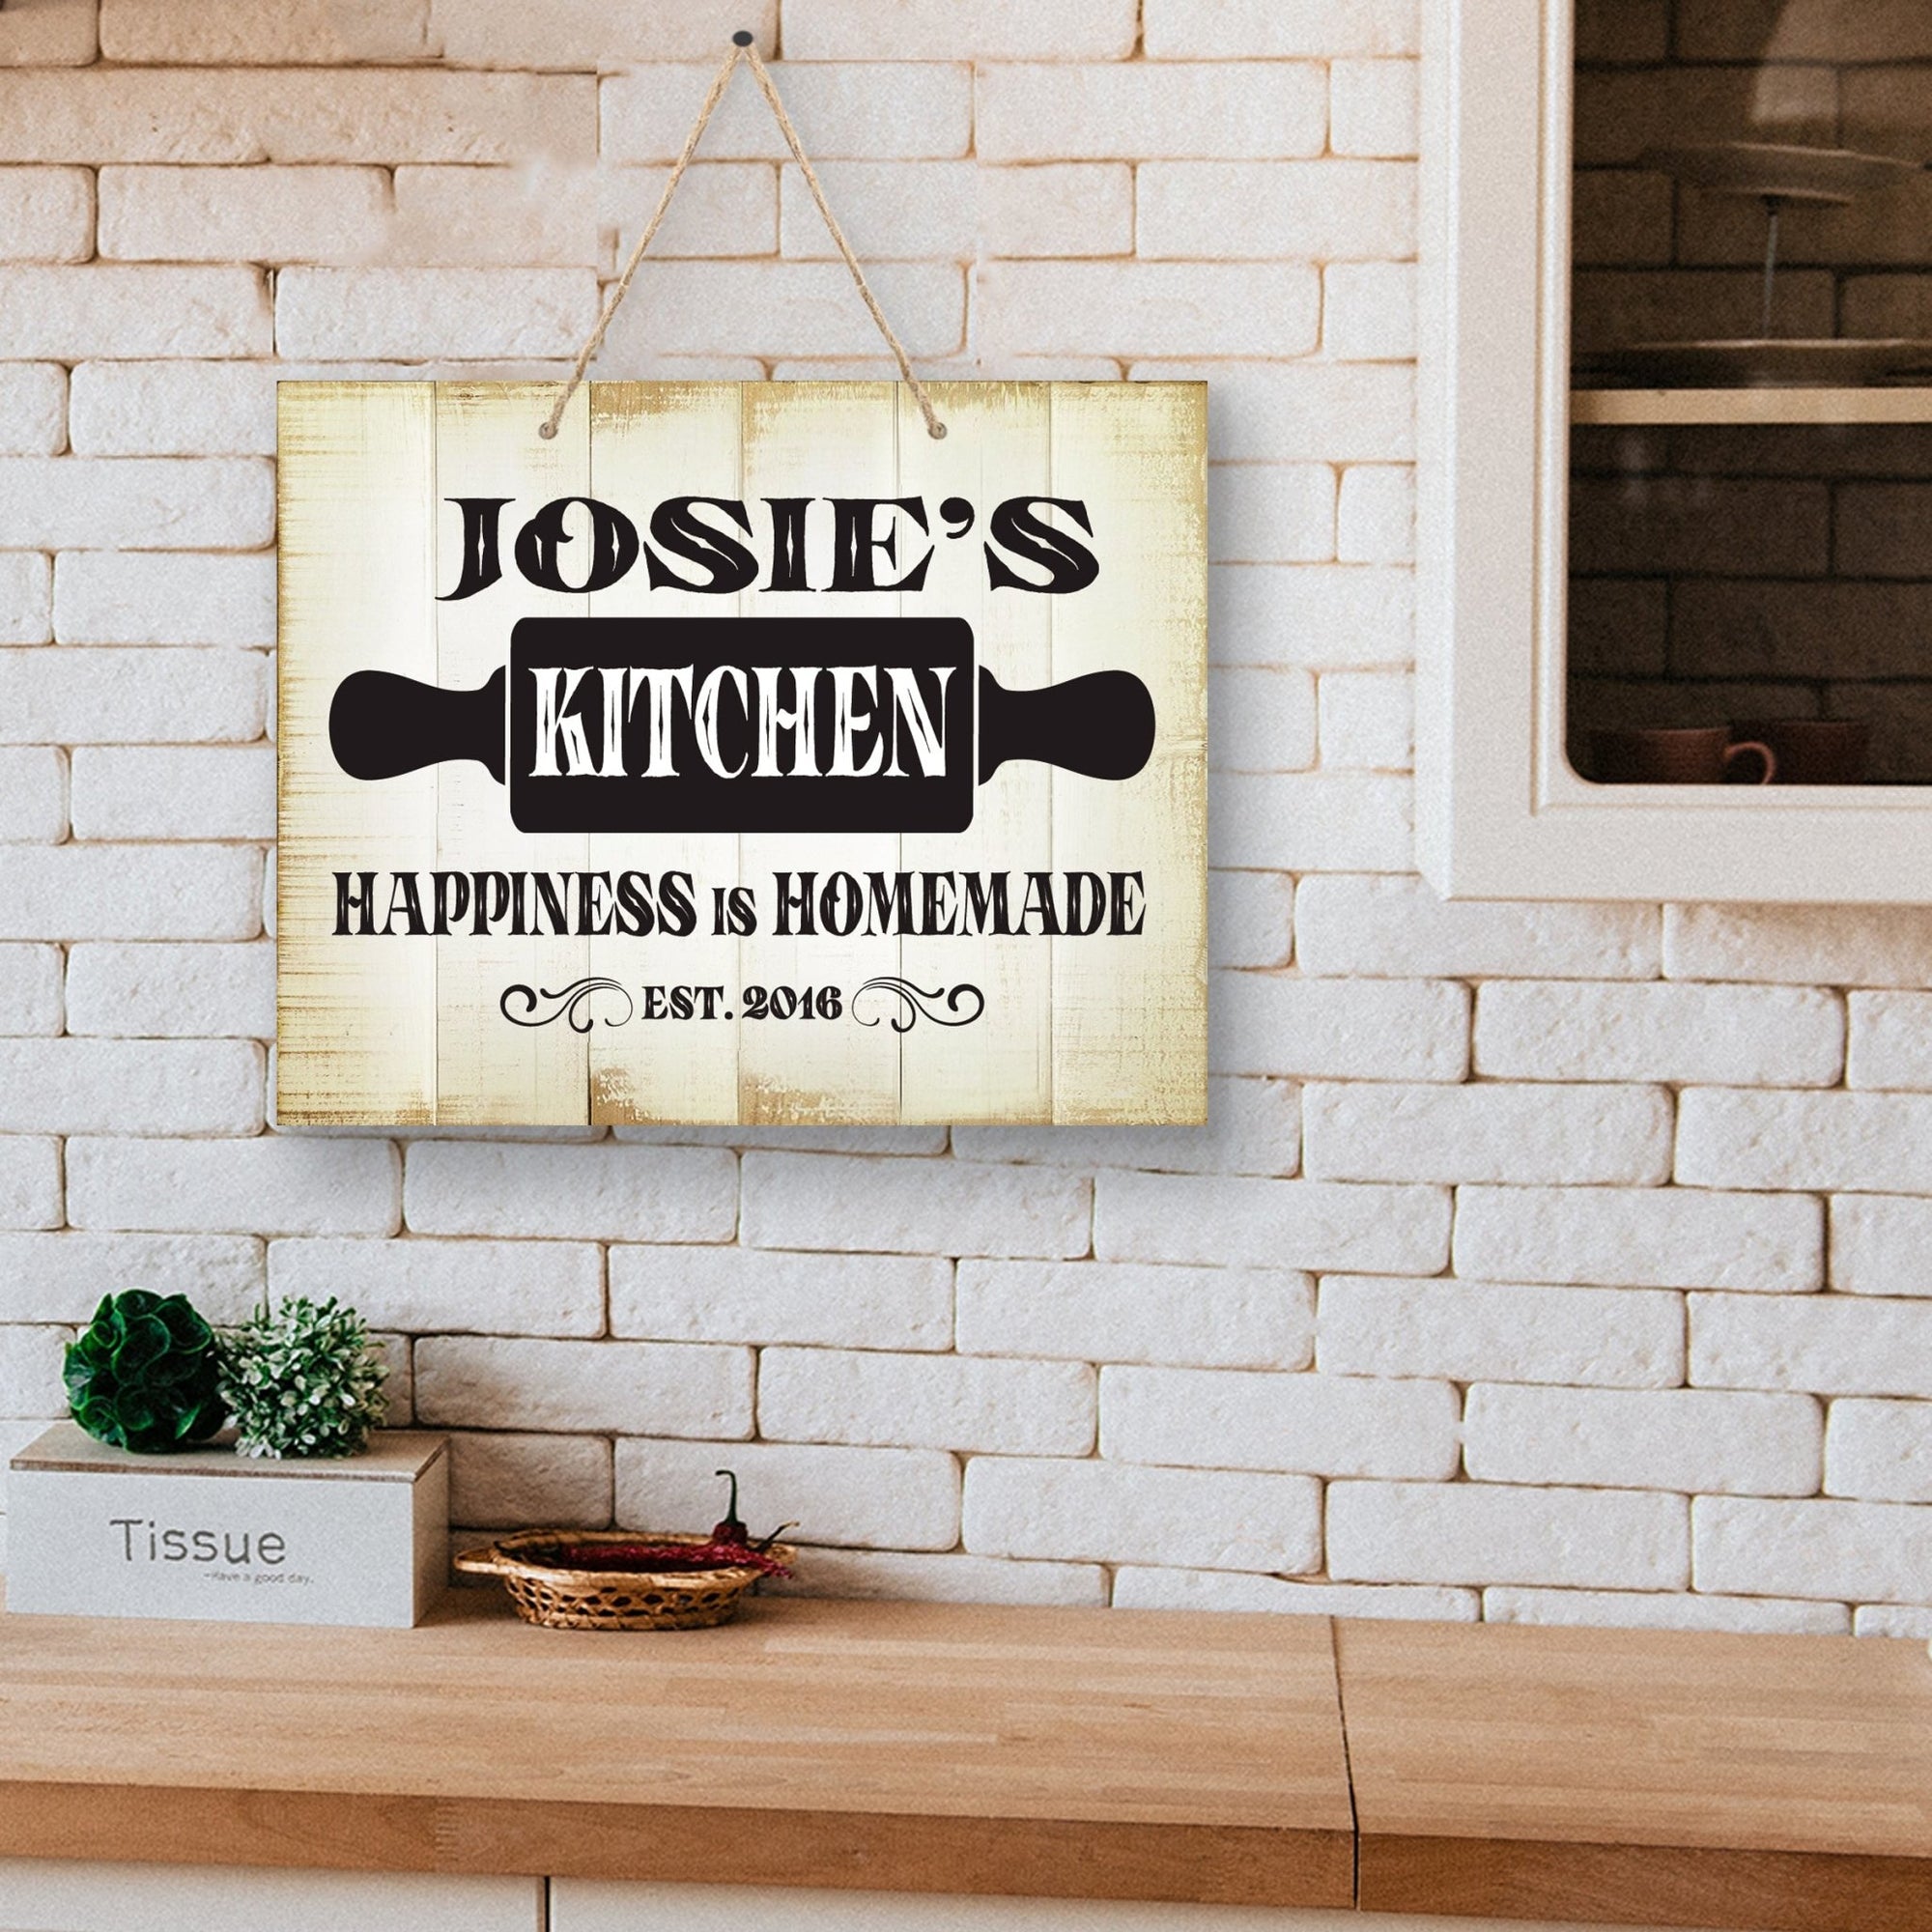 Rustic-Inspired Wooden Wall Hanging Rope Sign For Kitchen & Home Décor - Happiness Is Homemade